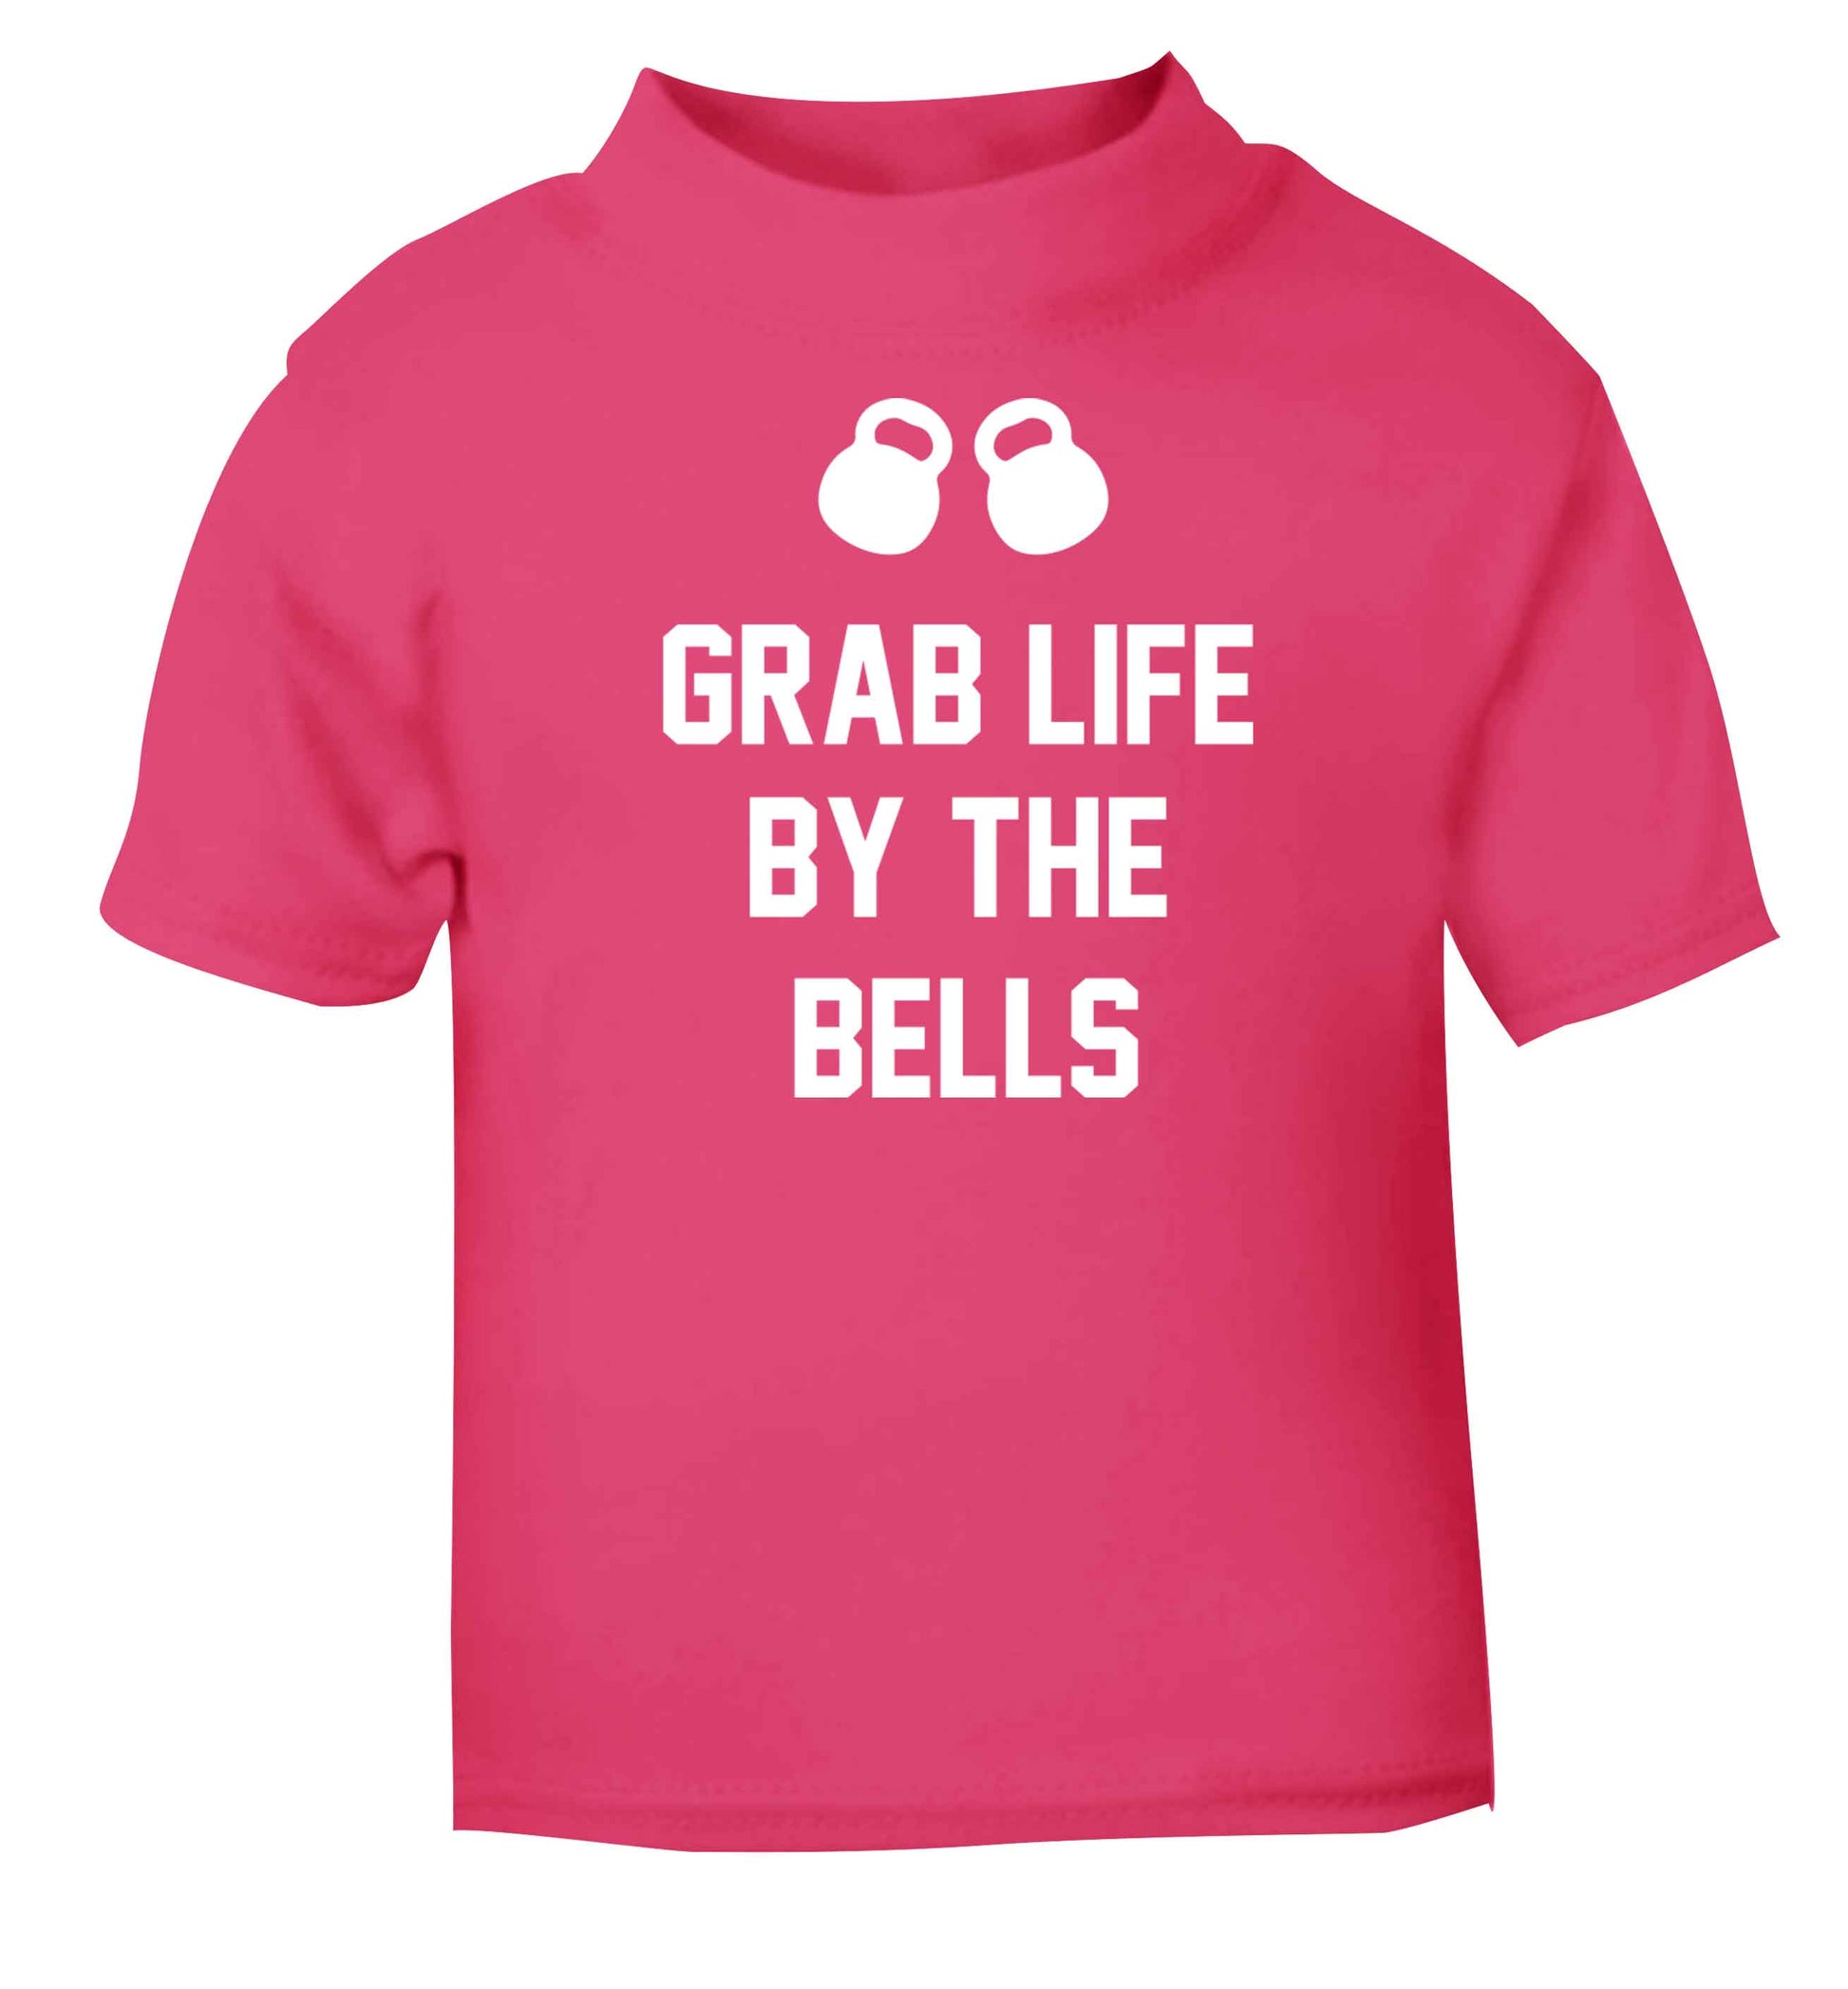 Grab life by the bells pink baby toddler Tshirt 2 Years